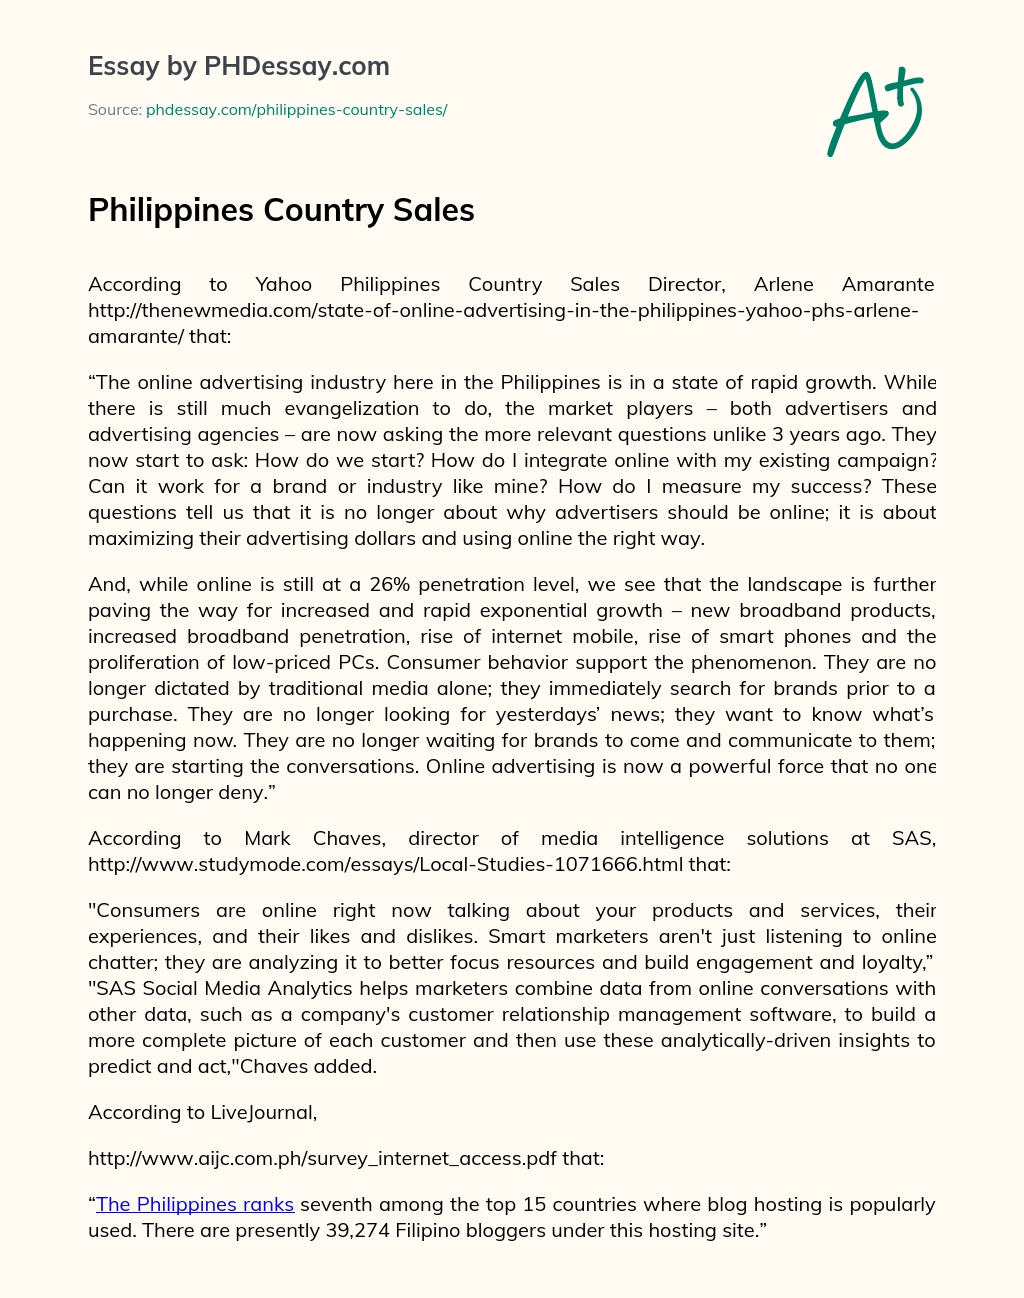 Philippines Country Sales essay